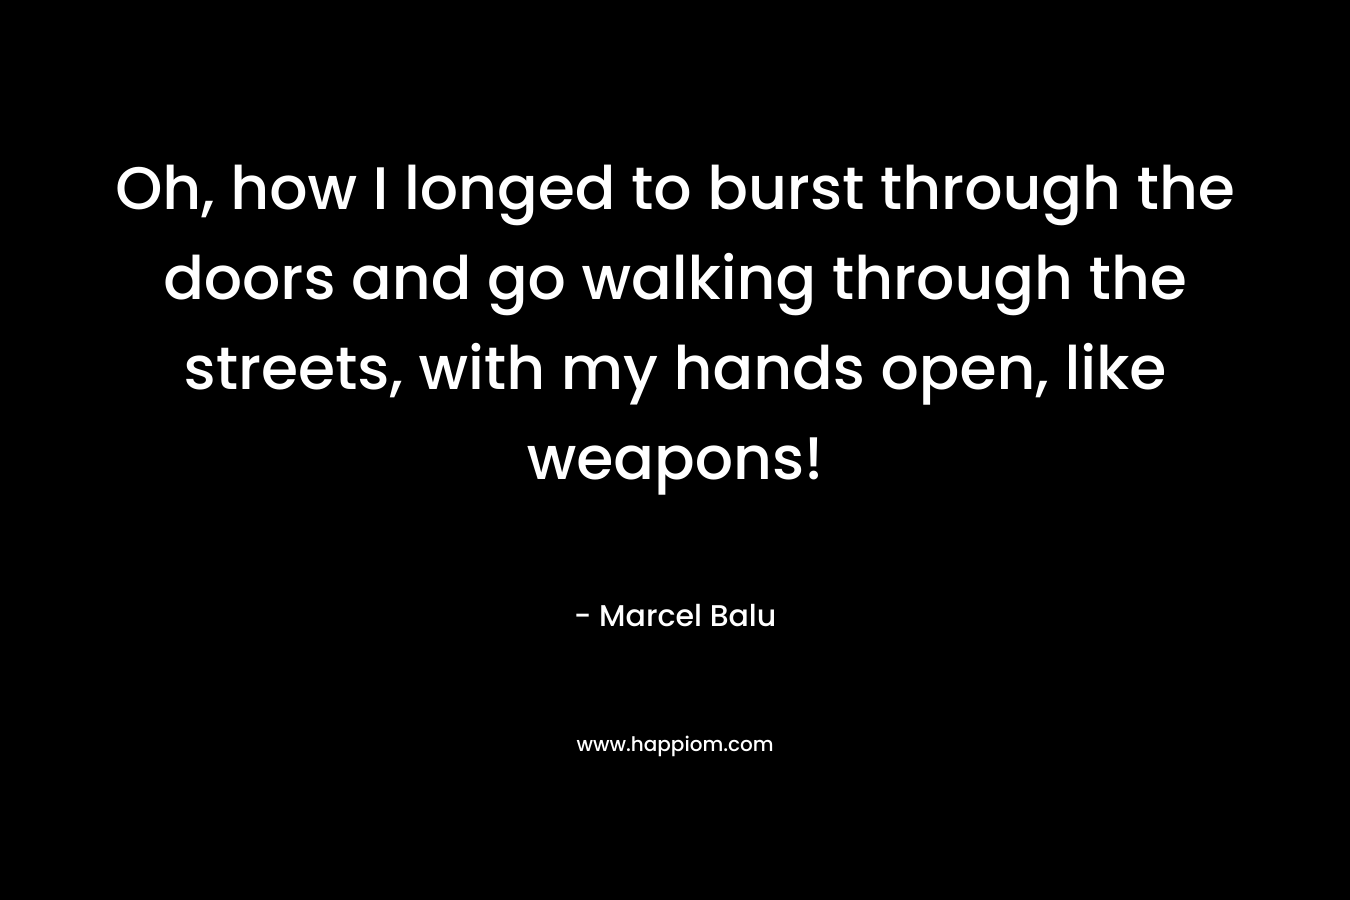 Oh, how I longed to burst through the doors and go walking through the streets, with my hands open, like weapons! – Marcel Balu